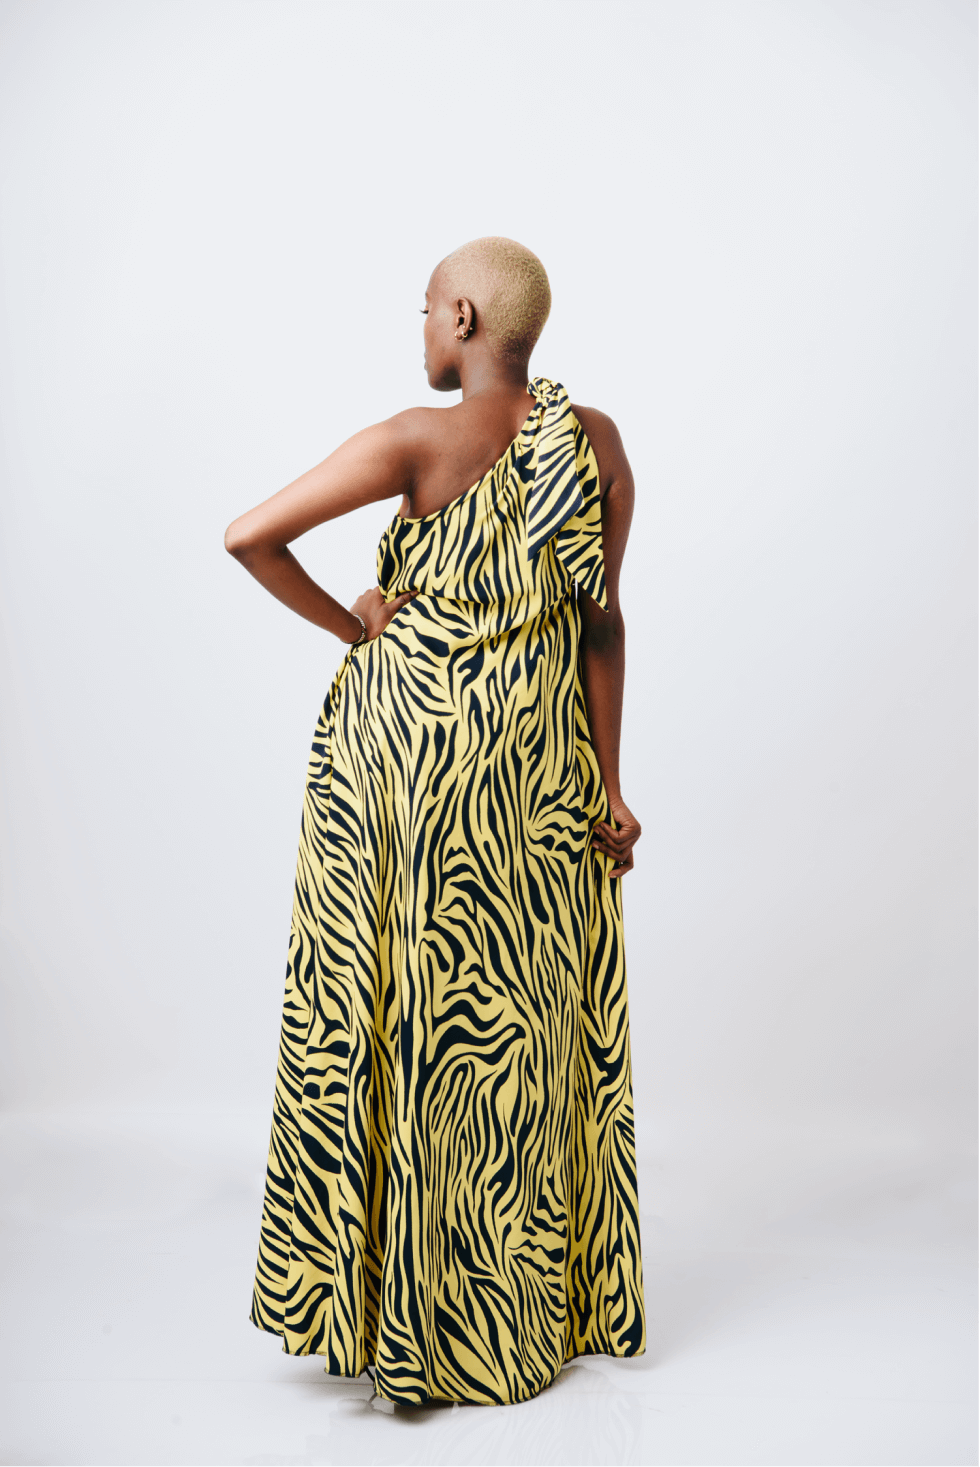 Shop Mara Tie One-Shoulder Maxi Dress by Cyami Custom Fit on Arrai. Discover stylish, affordable clothing, jewelry, handbags and unique handmade pieces from top Kenyan & African fashion brands prioritising sustainability and quality craftsmanship.